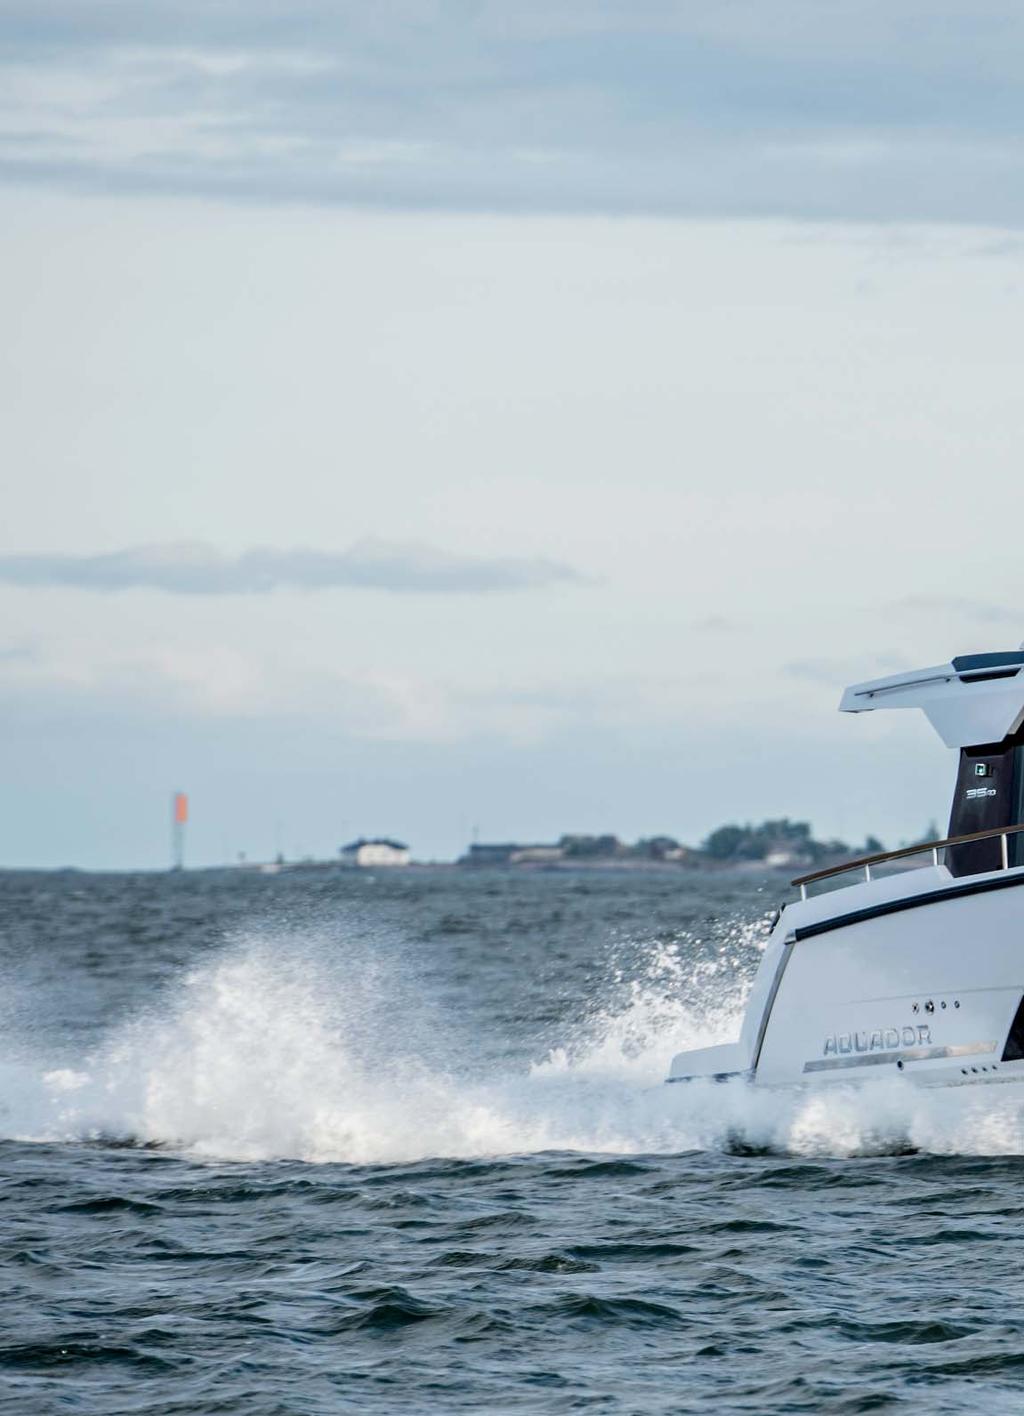 In keeping with that enduring passion for perfection, Aquador boats are built to the highest standards of safety, convenience and seaworthiness by a team